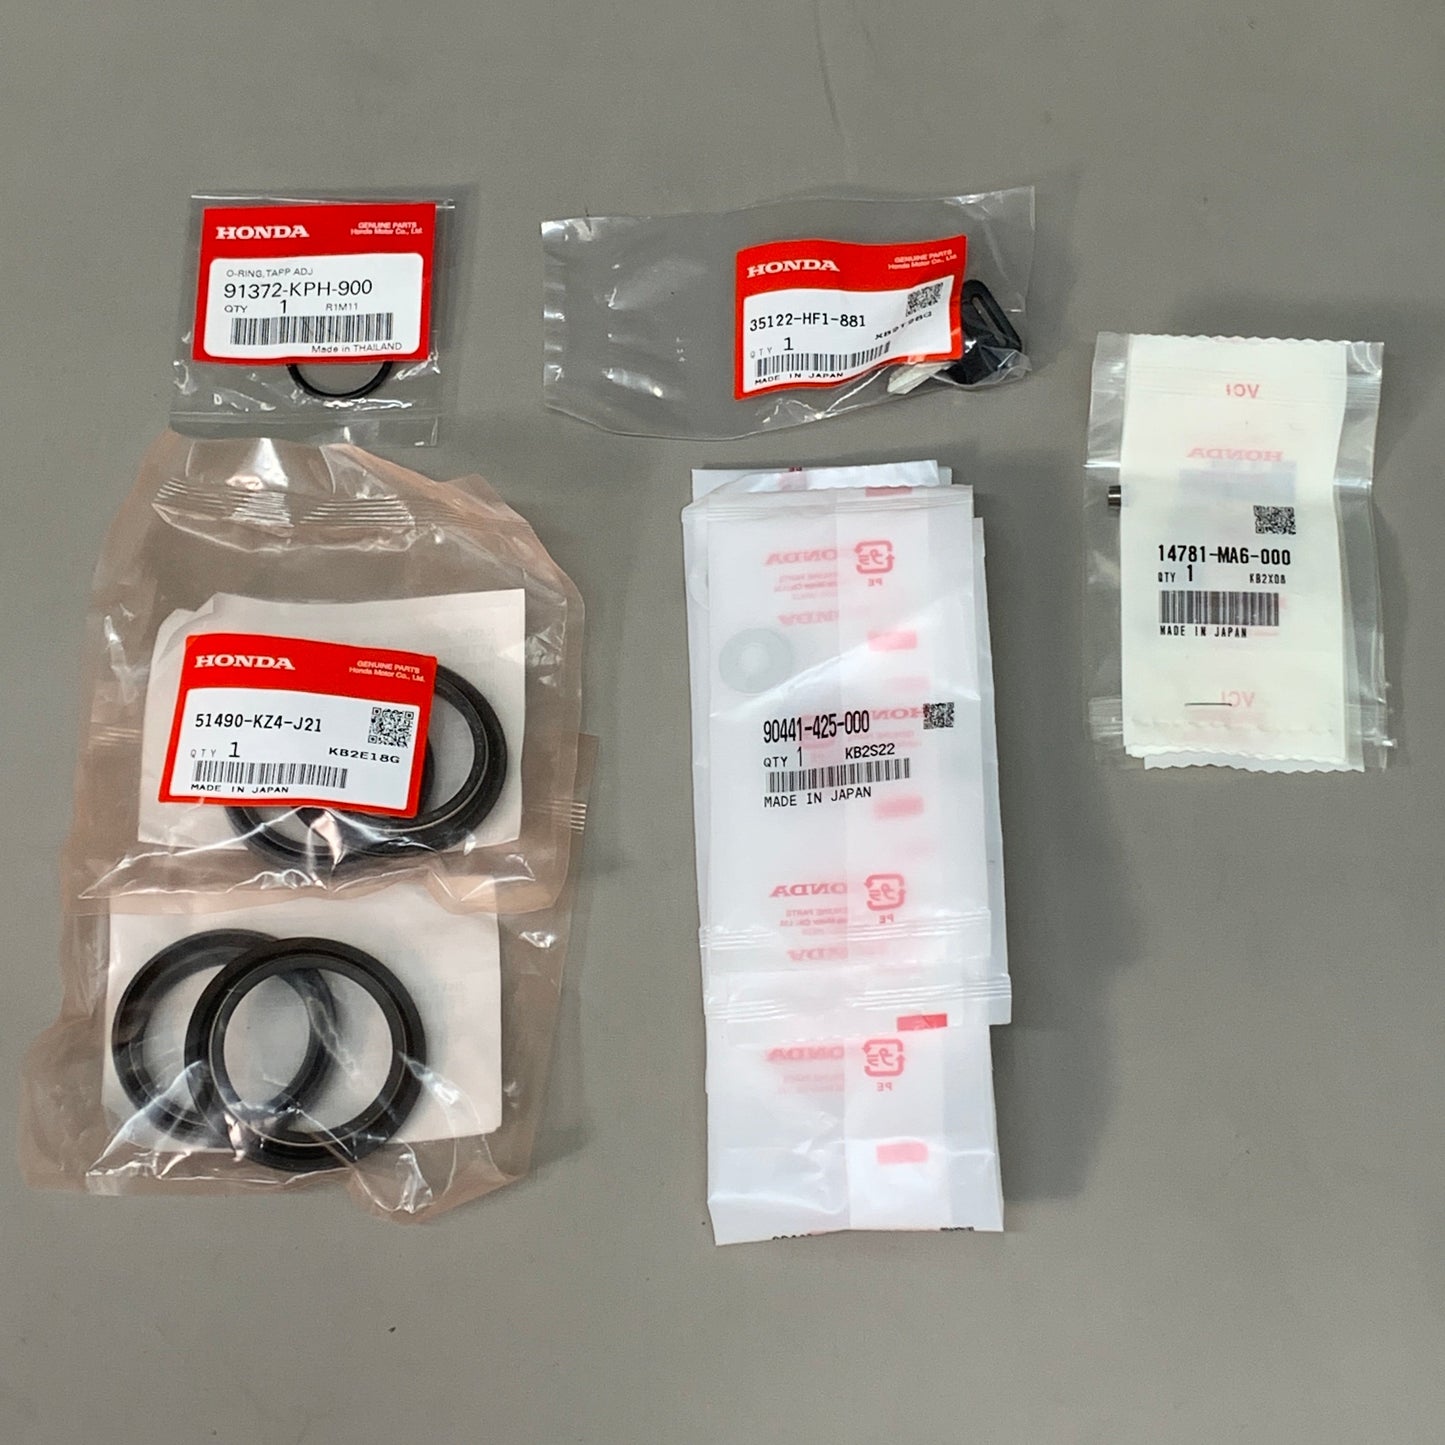 HONDA OEM Genuine Parts Mixed LOT OF 45! See Description for Detailed Parts List (New)